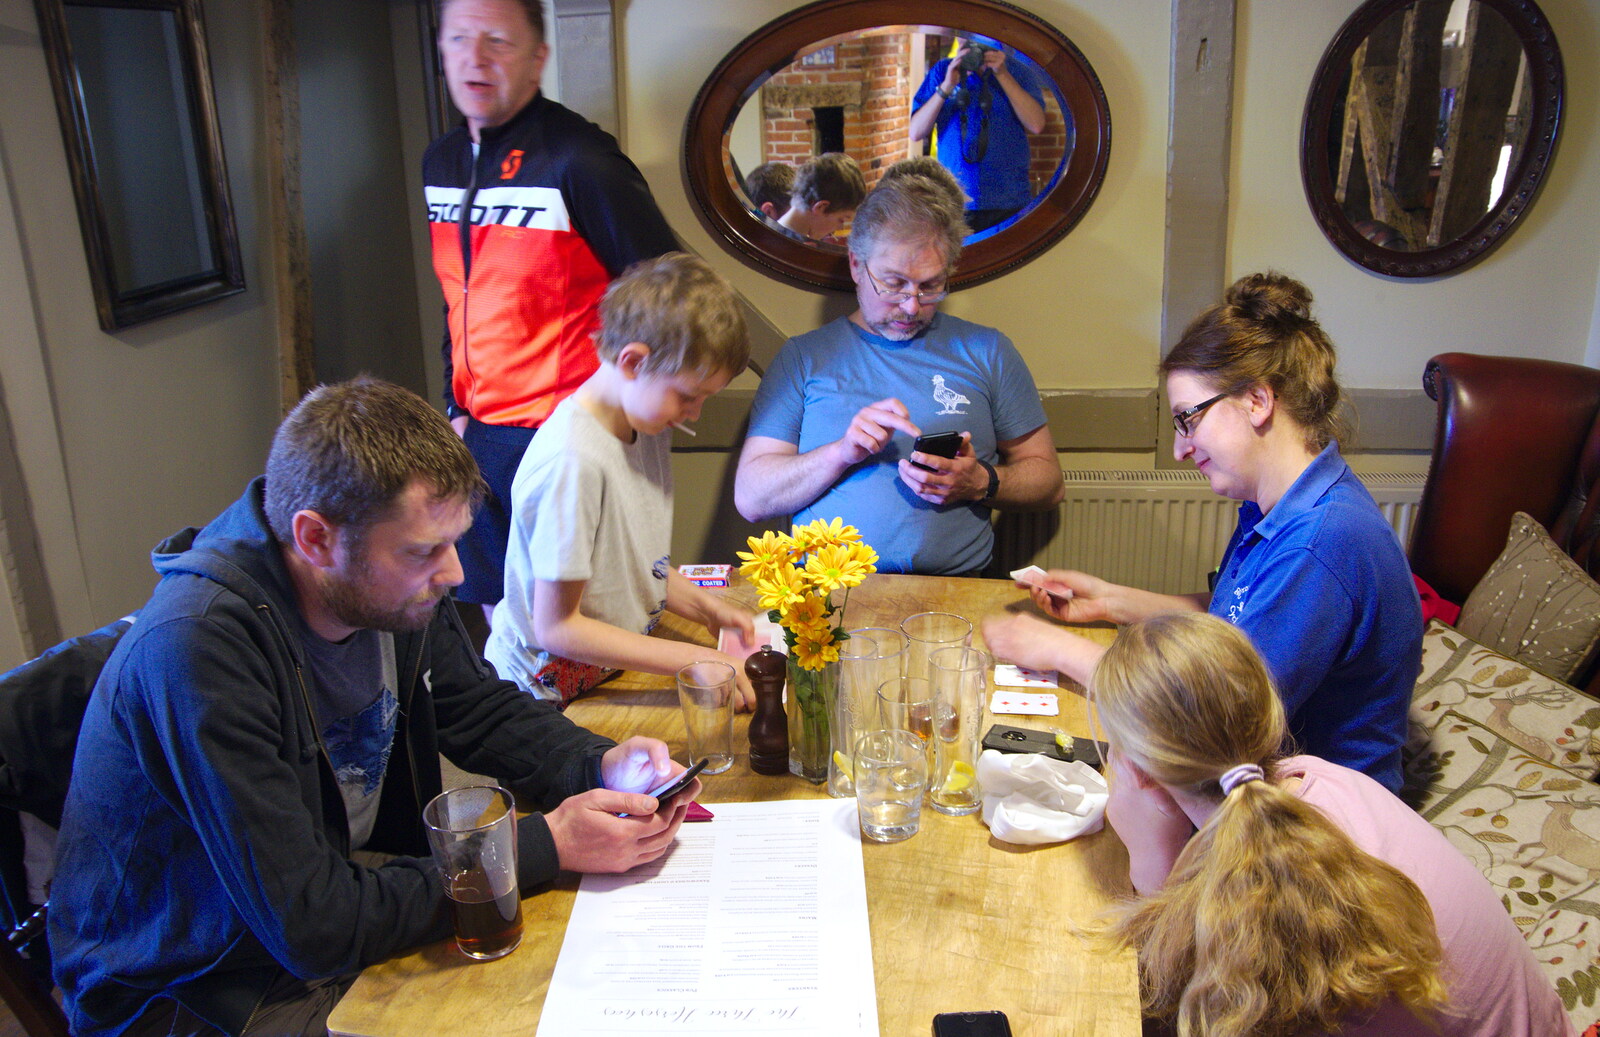 Everyone's on their phone from The BSCC Bike Ride 2019, Coggeshall, Essex - 11th May 2019